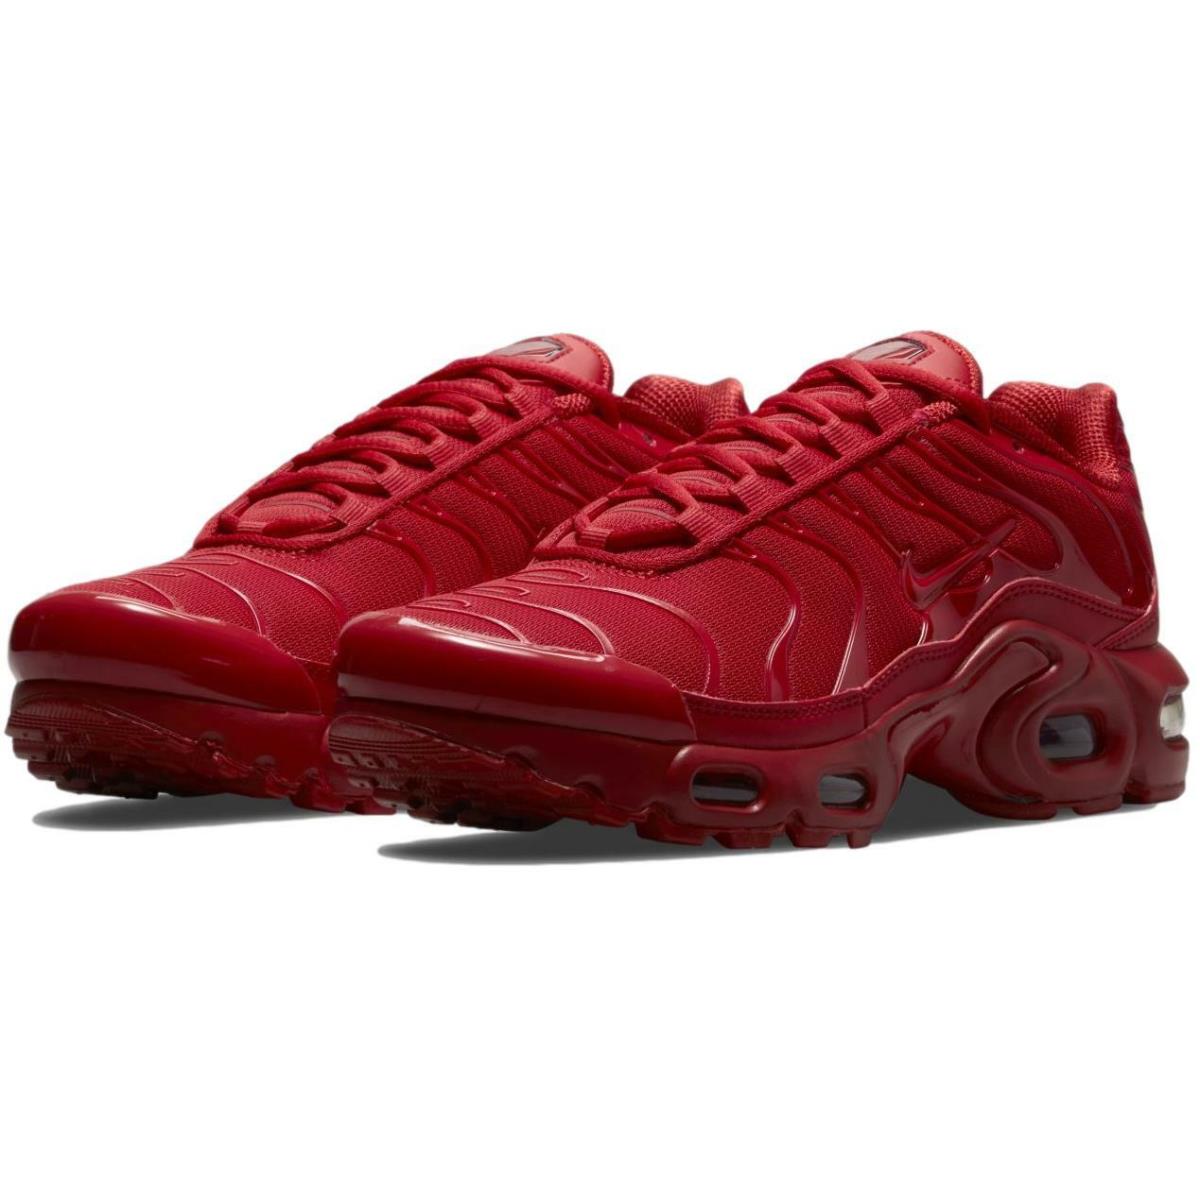 Nike Air Max Plus GS `university Red` Youth Shoes Sneakers DM8877-600